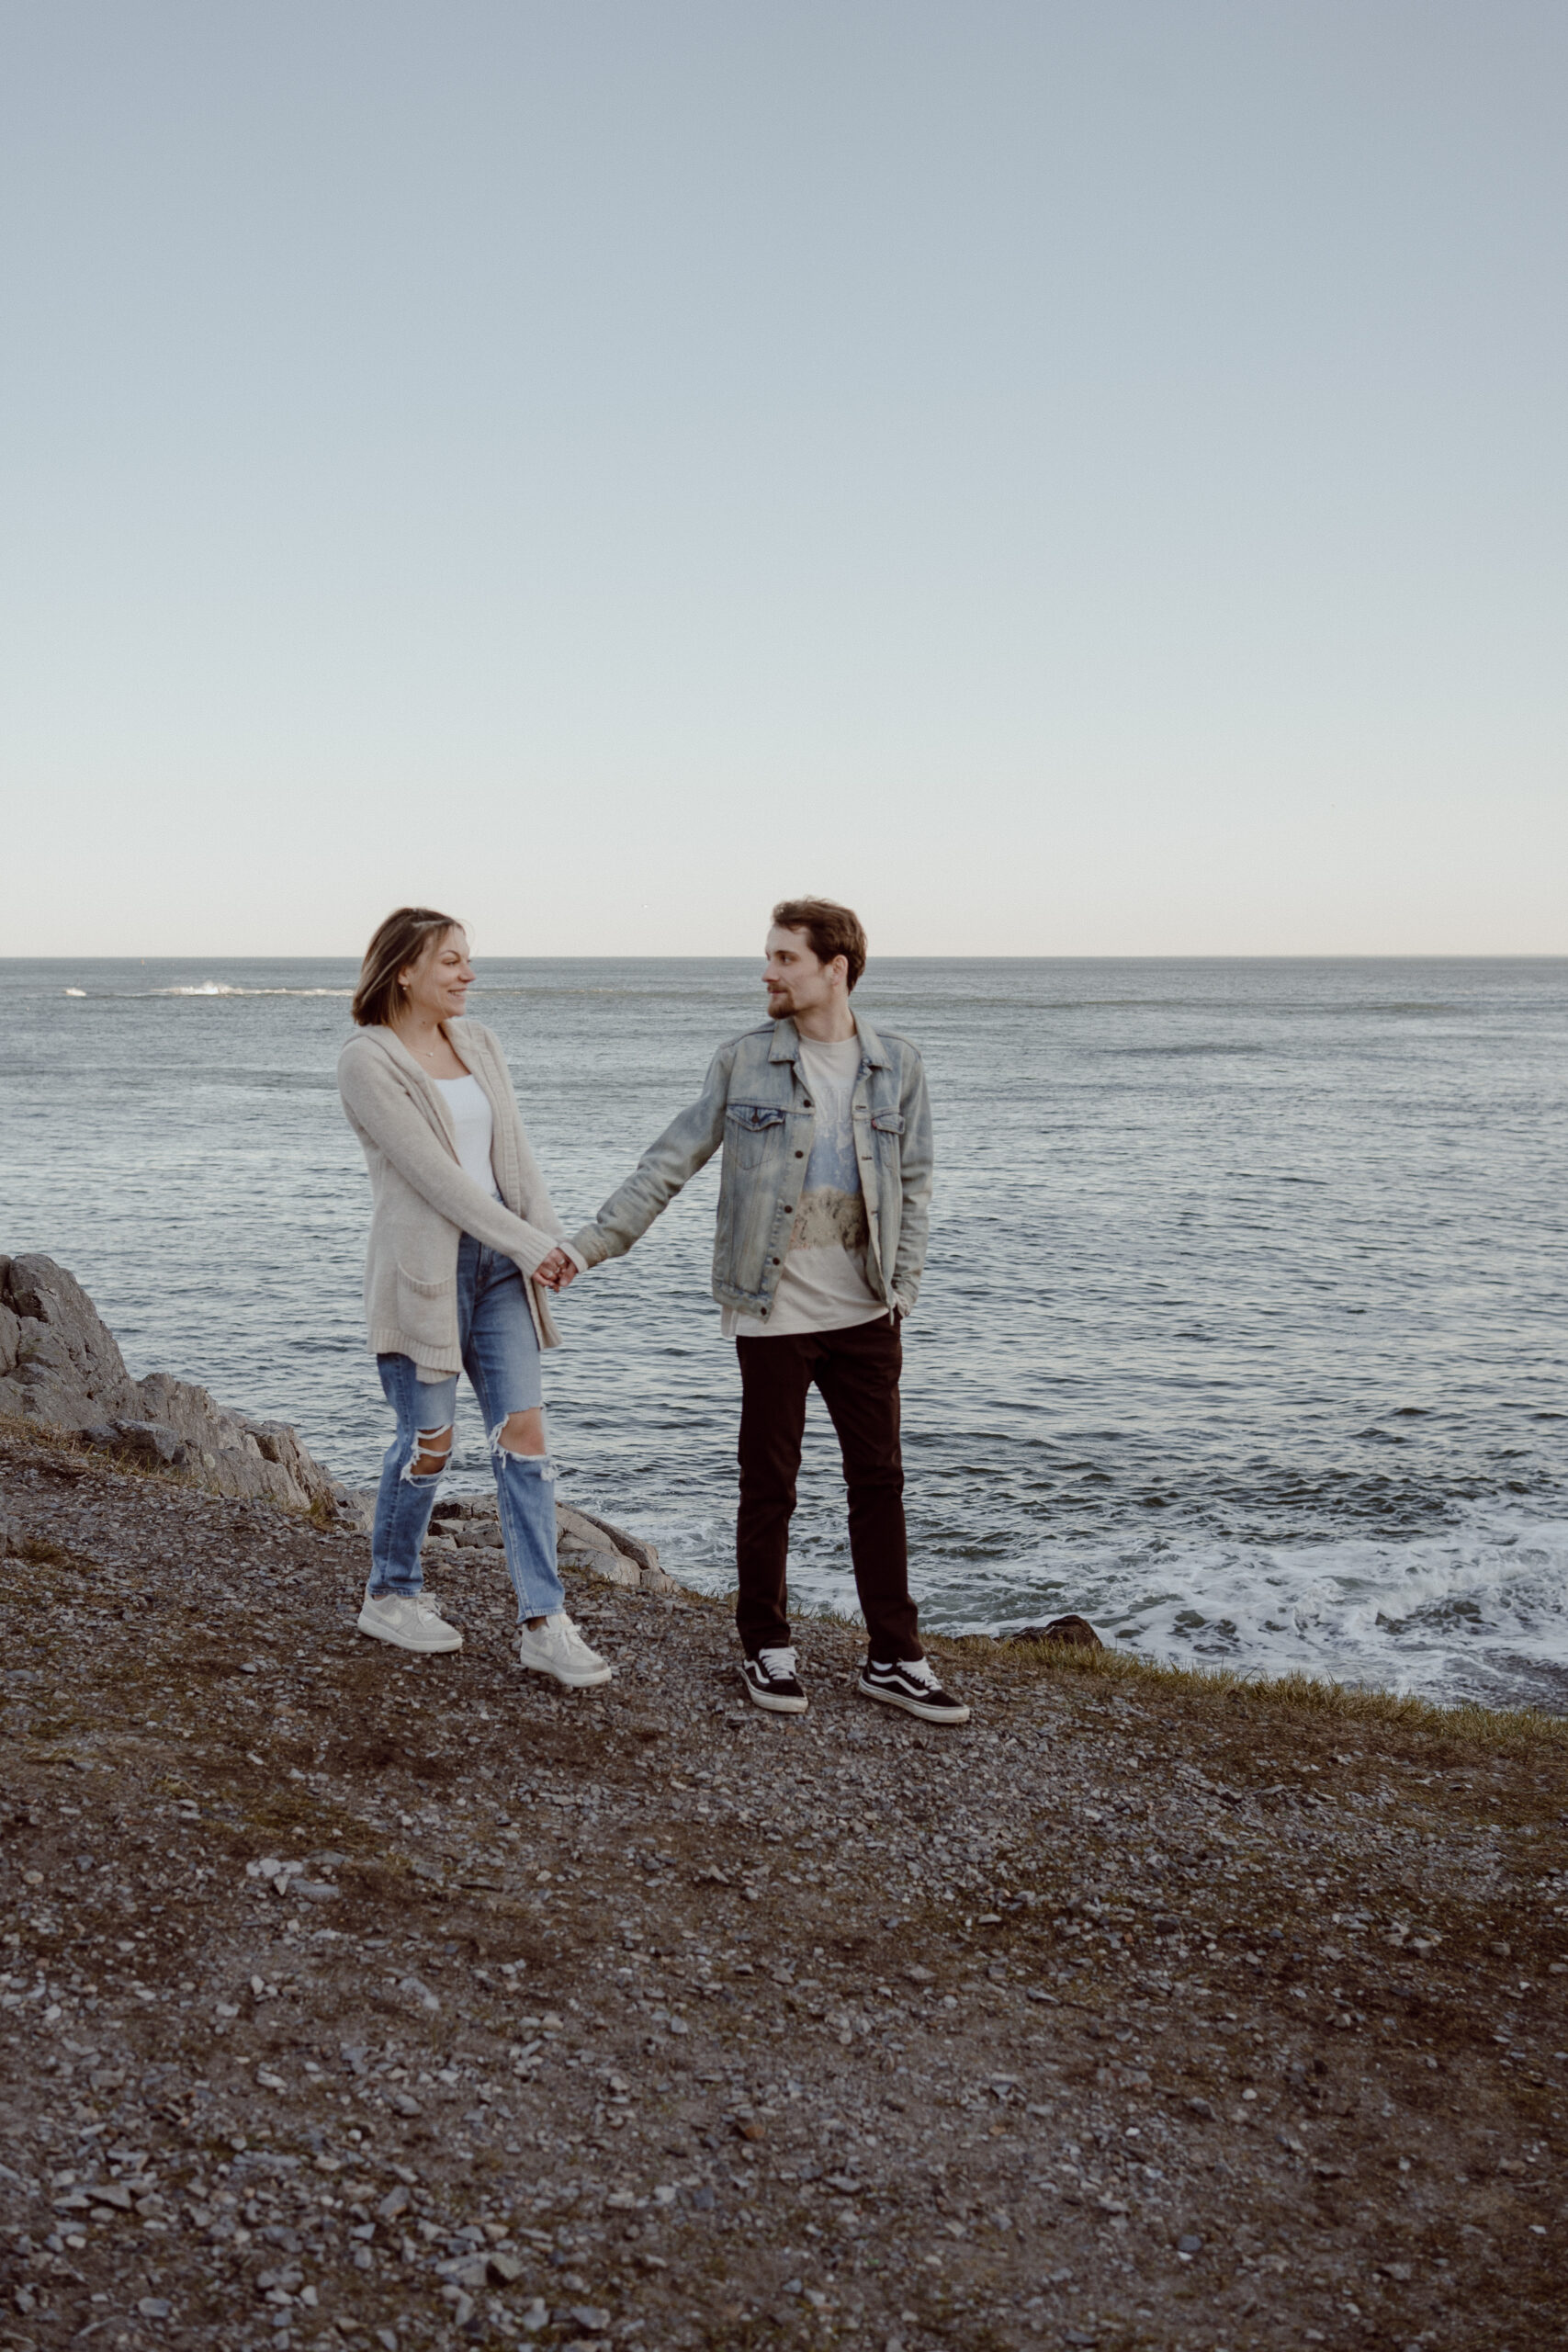 Engaged couple walks along the cliff's edge, sharing loving gazes during their romantic engagement session at Castle Rock, Marblehead, MA, capturing the breathtaking scenery and their affectionate bond